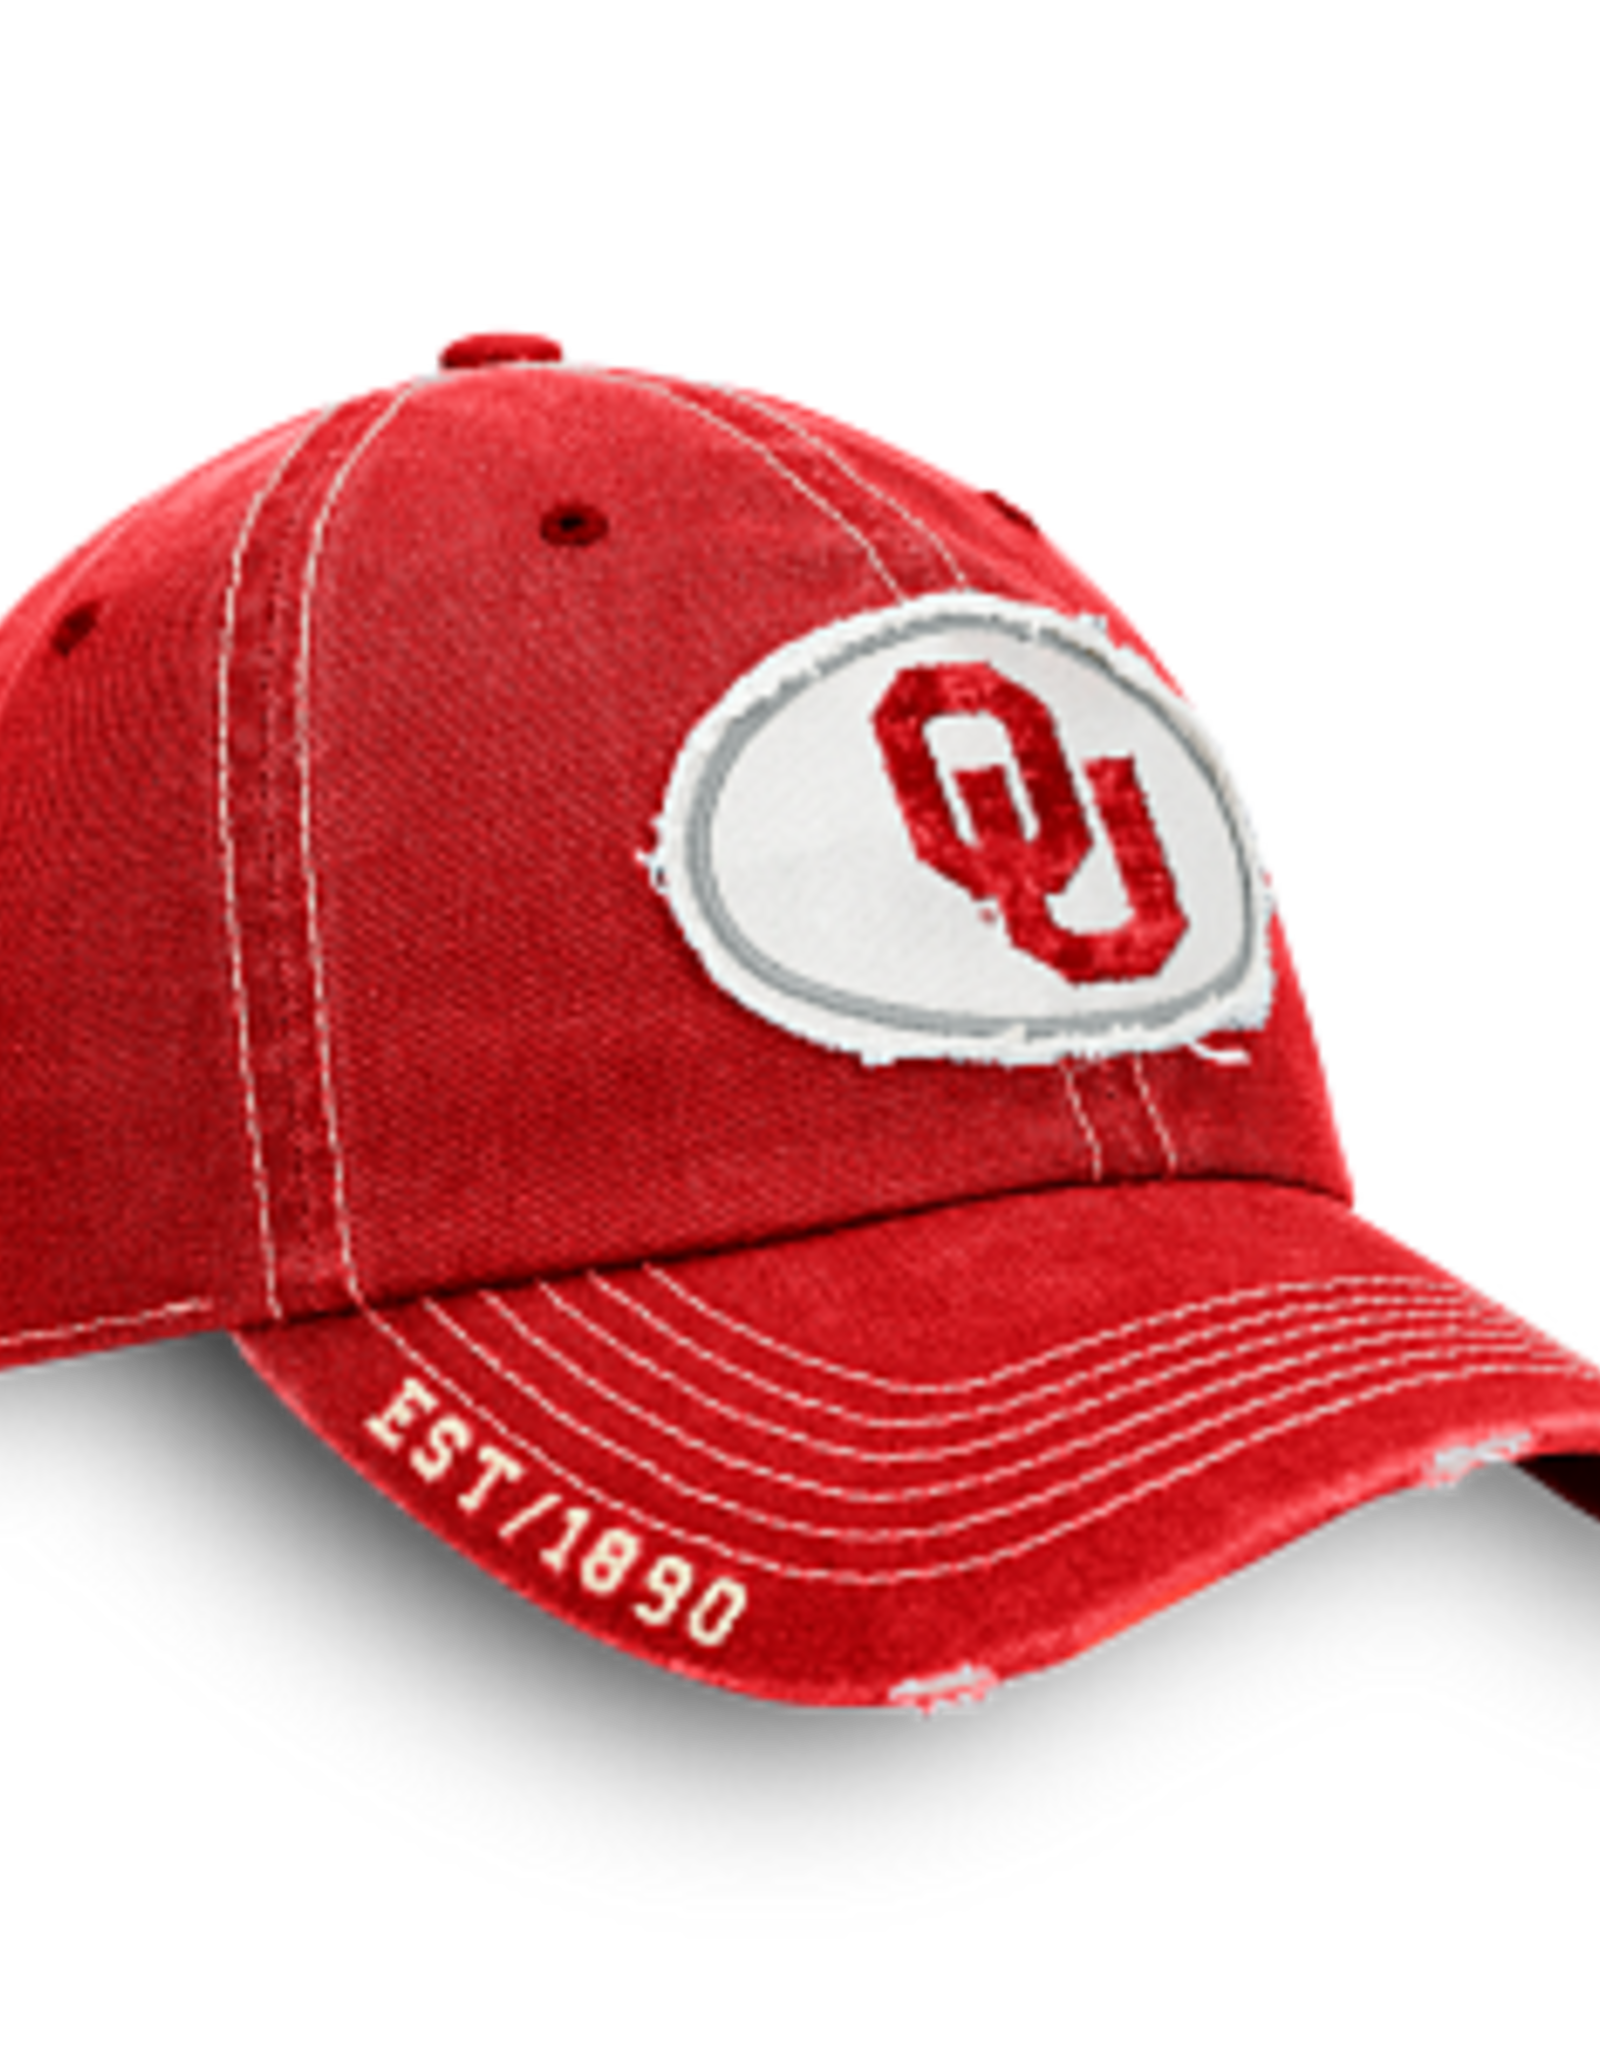 TOW Men's Kut Distressed Patch OU Adjustable Hat